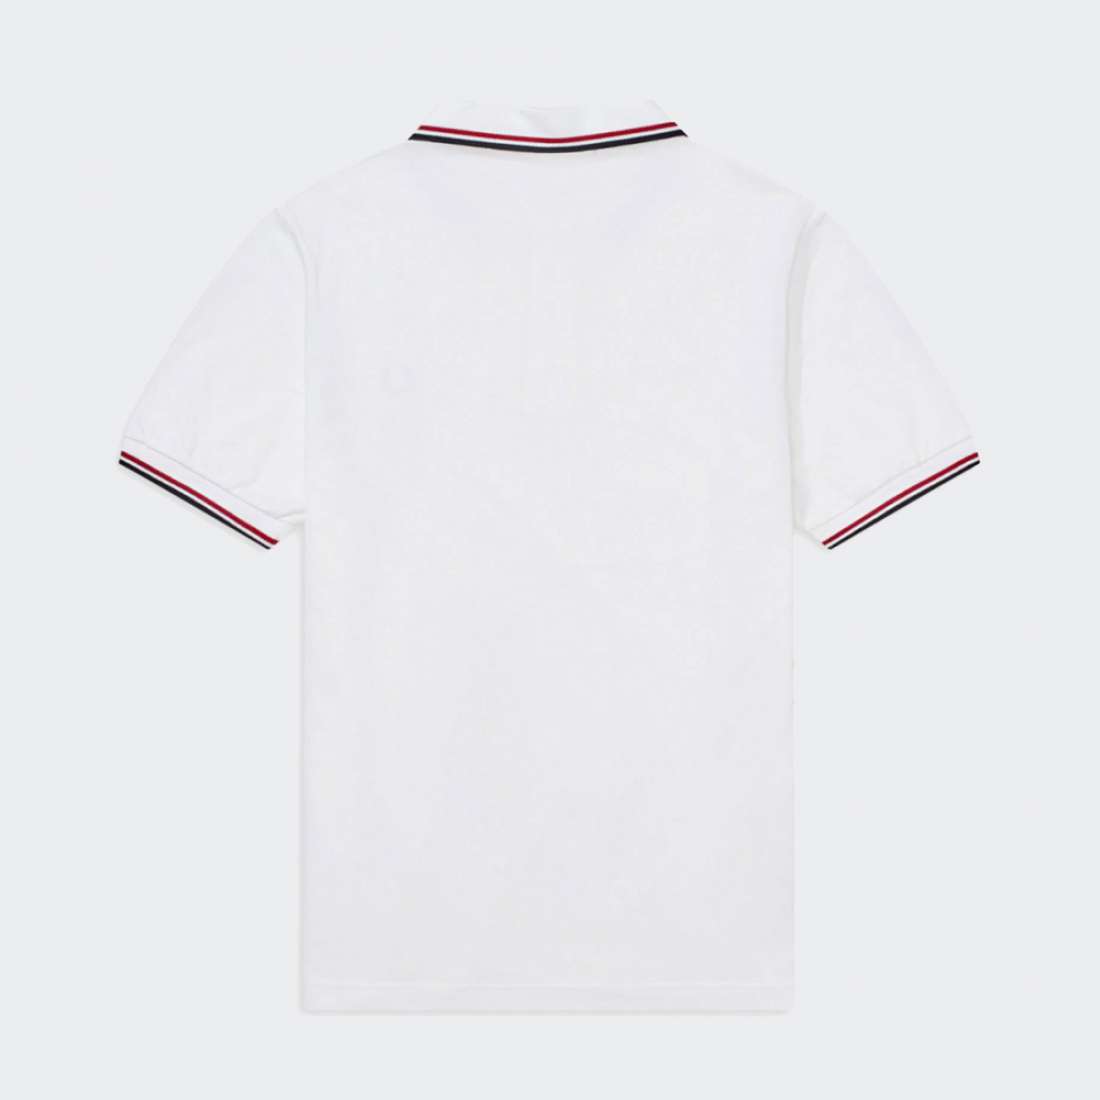 POLO FRED PERRY M3600 WHITE/RED/NAVY